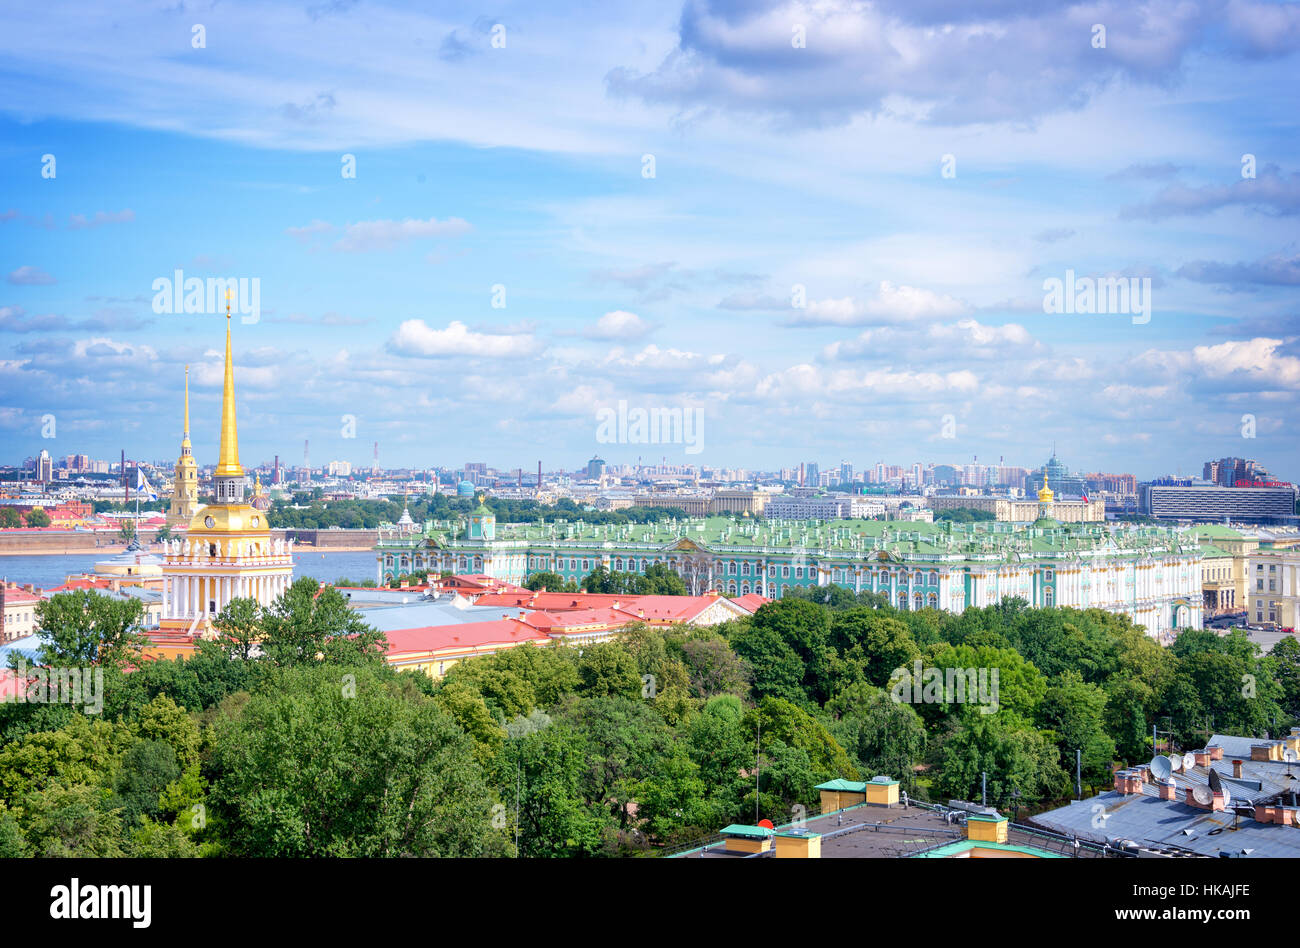 Aerial view of Admiralty tower and Hermitage, St Petersburg, Russia Stock Photo